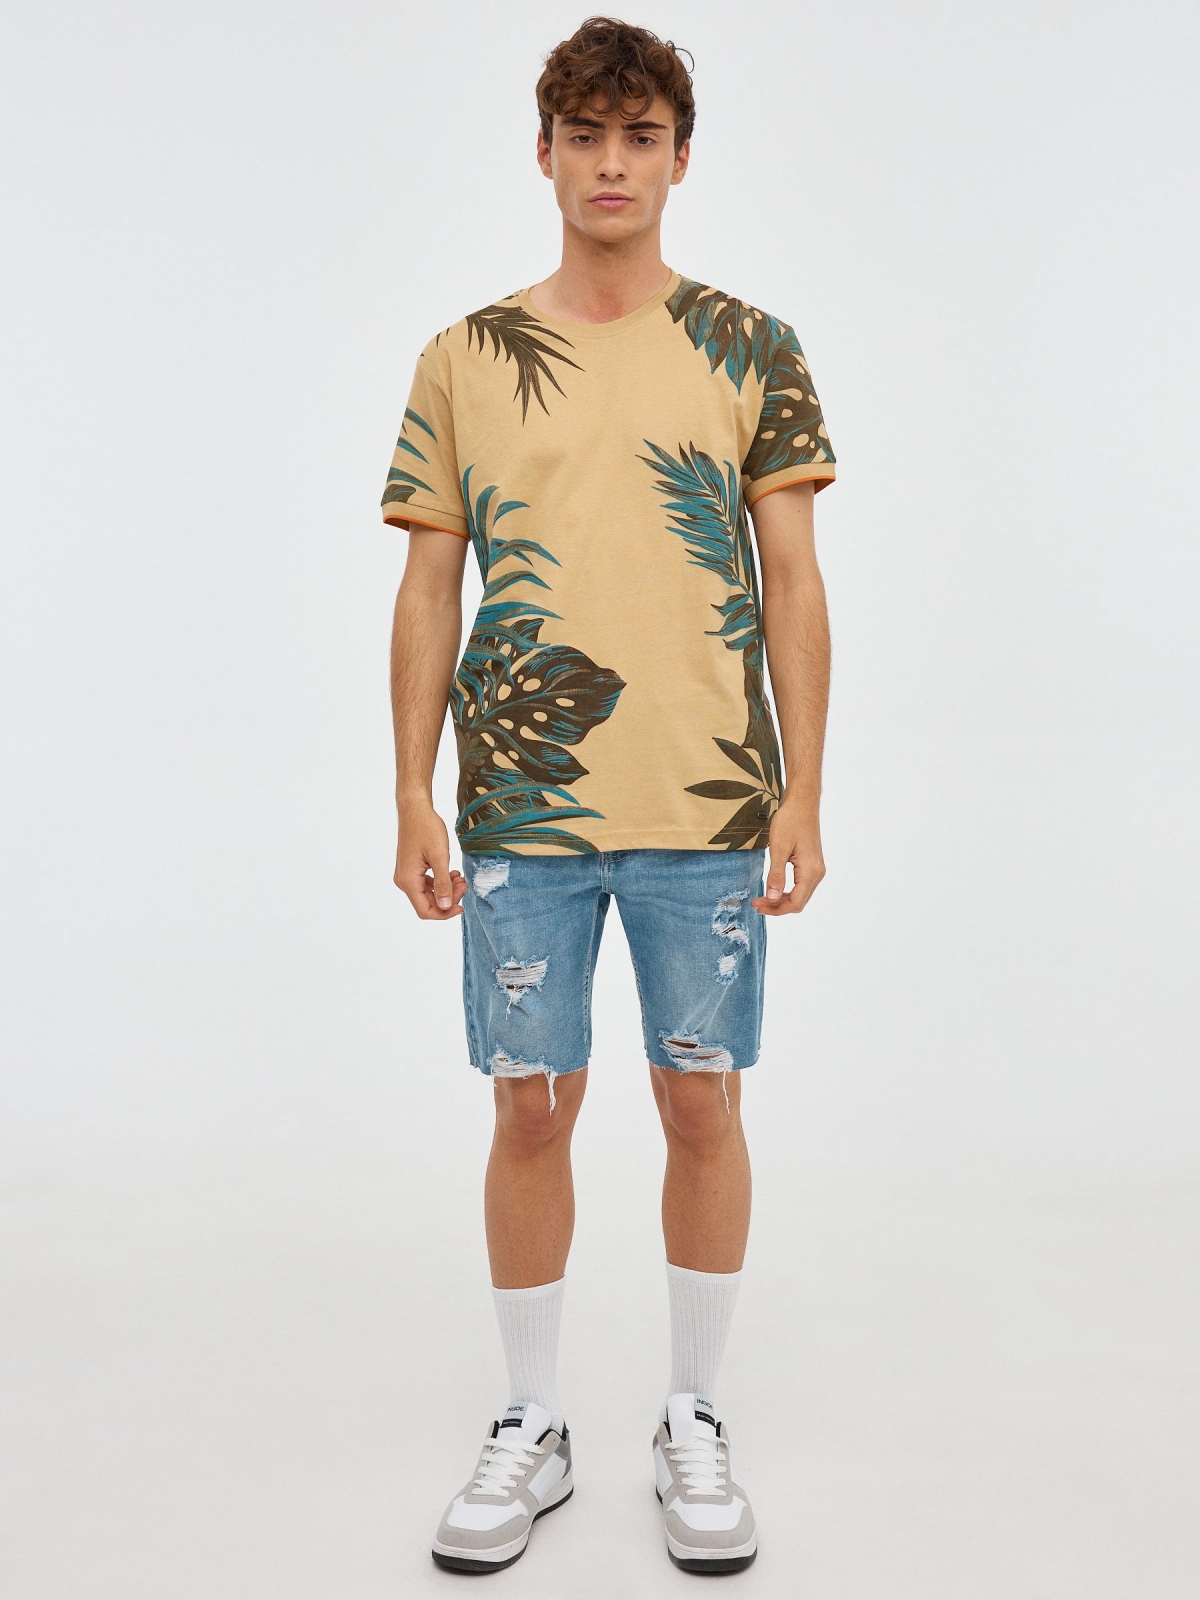 Tropical leaves t-shirt earth brown front view